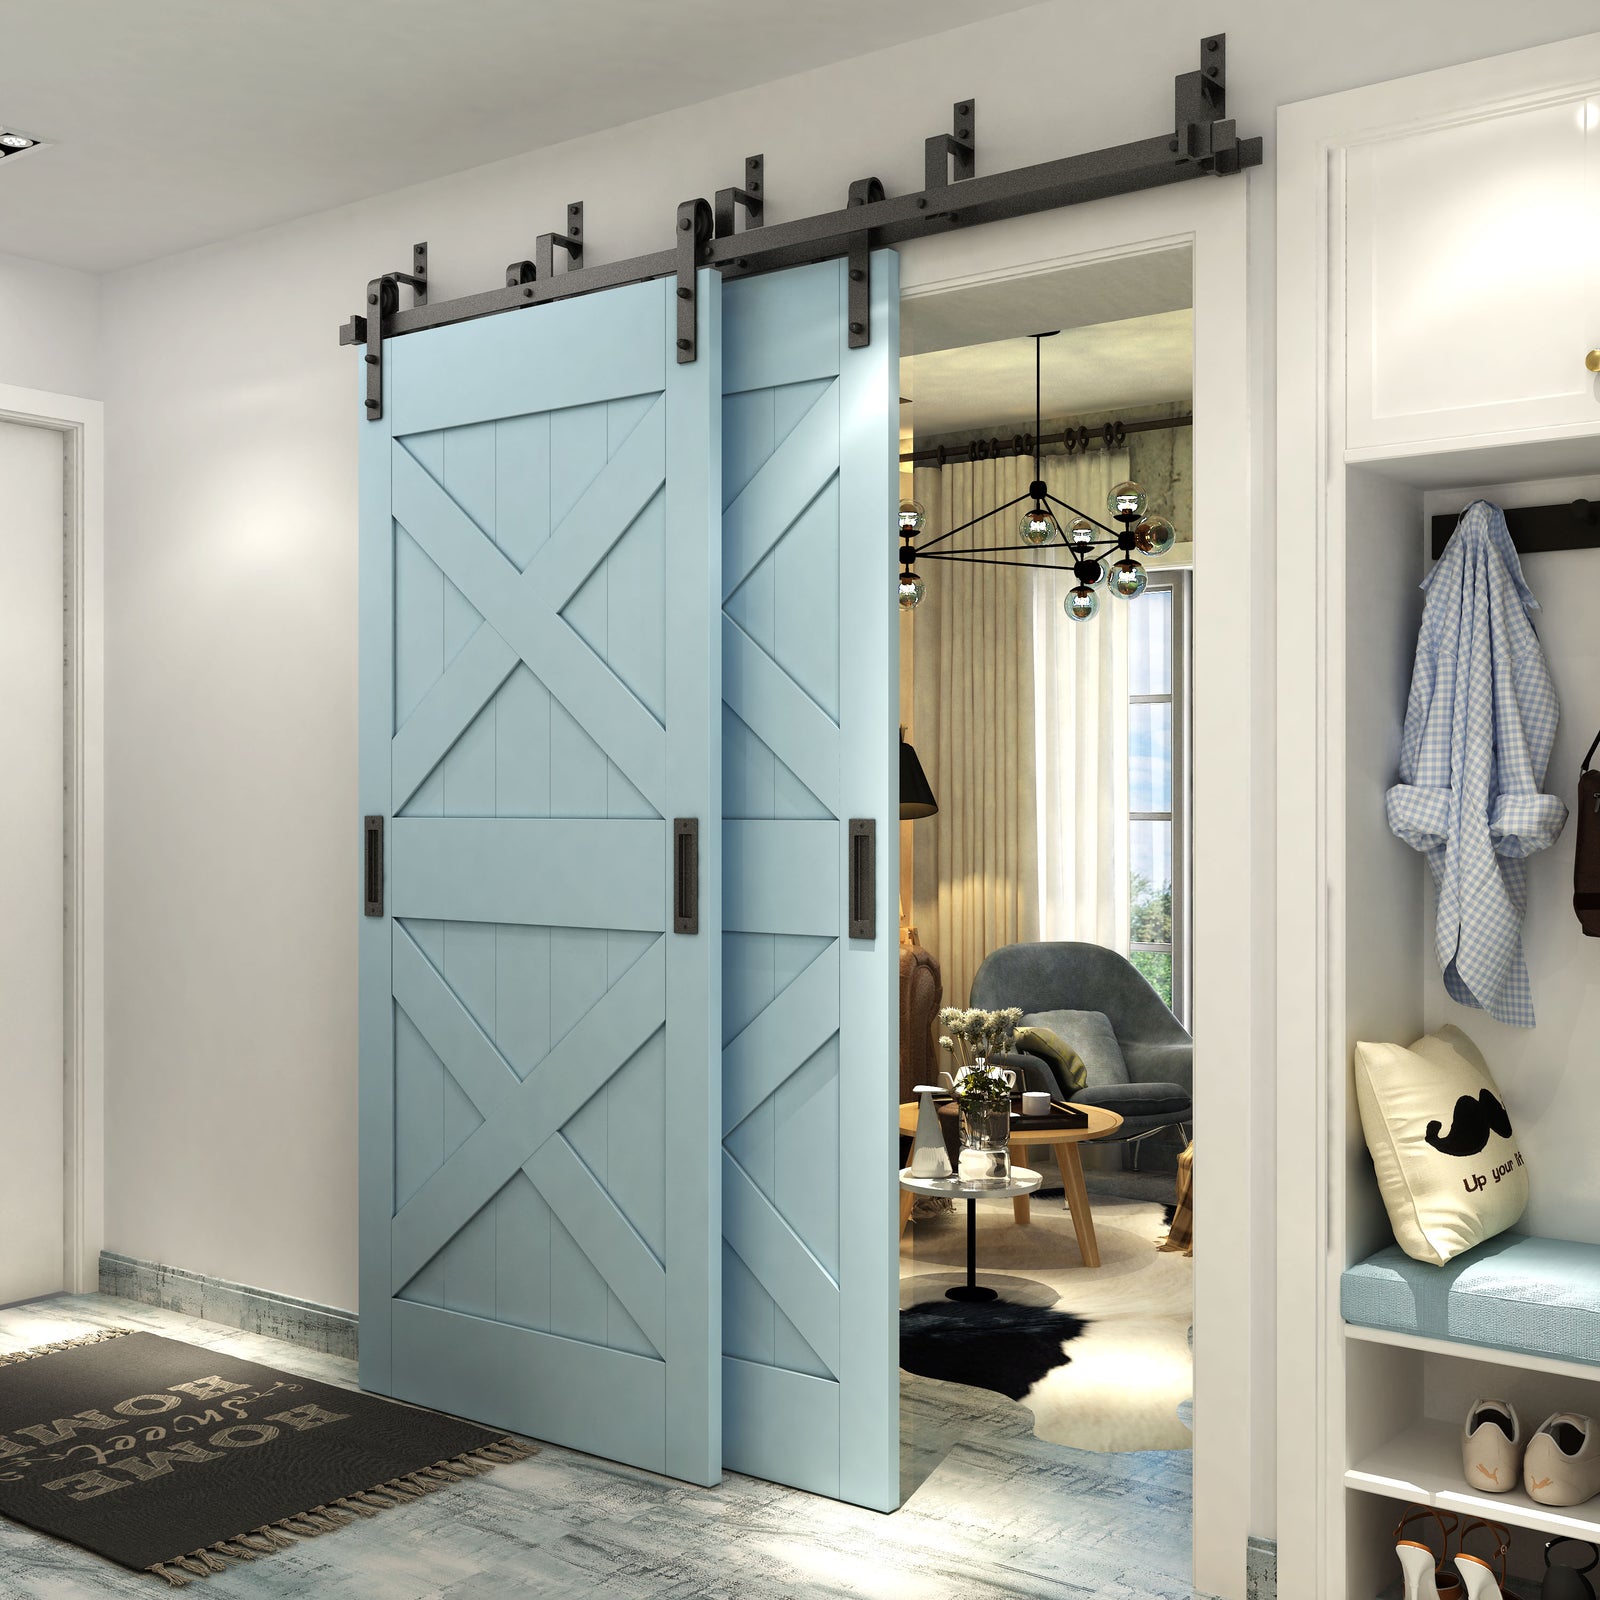 How to build double bypass barn doors